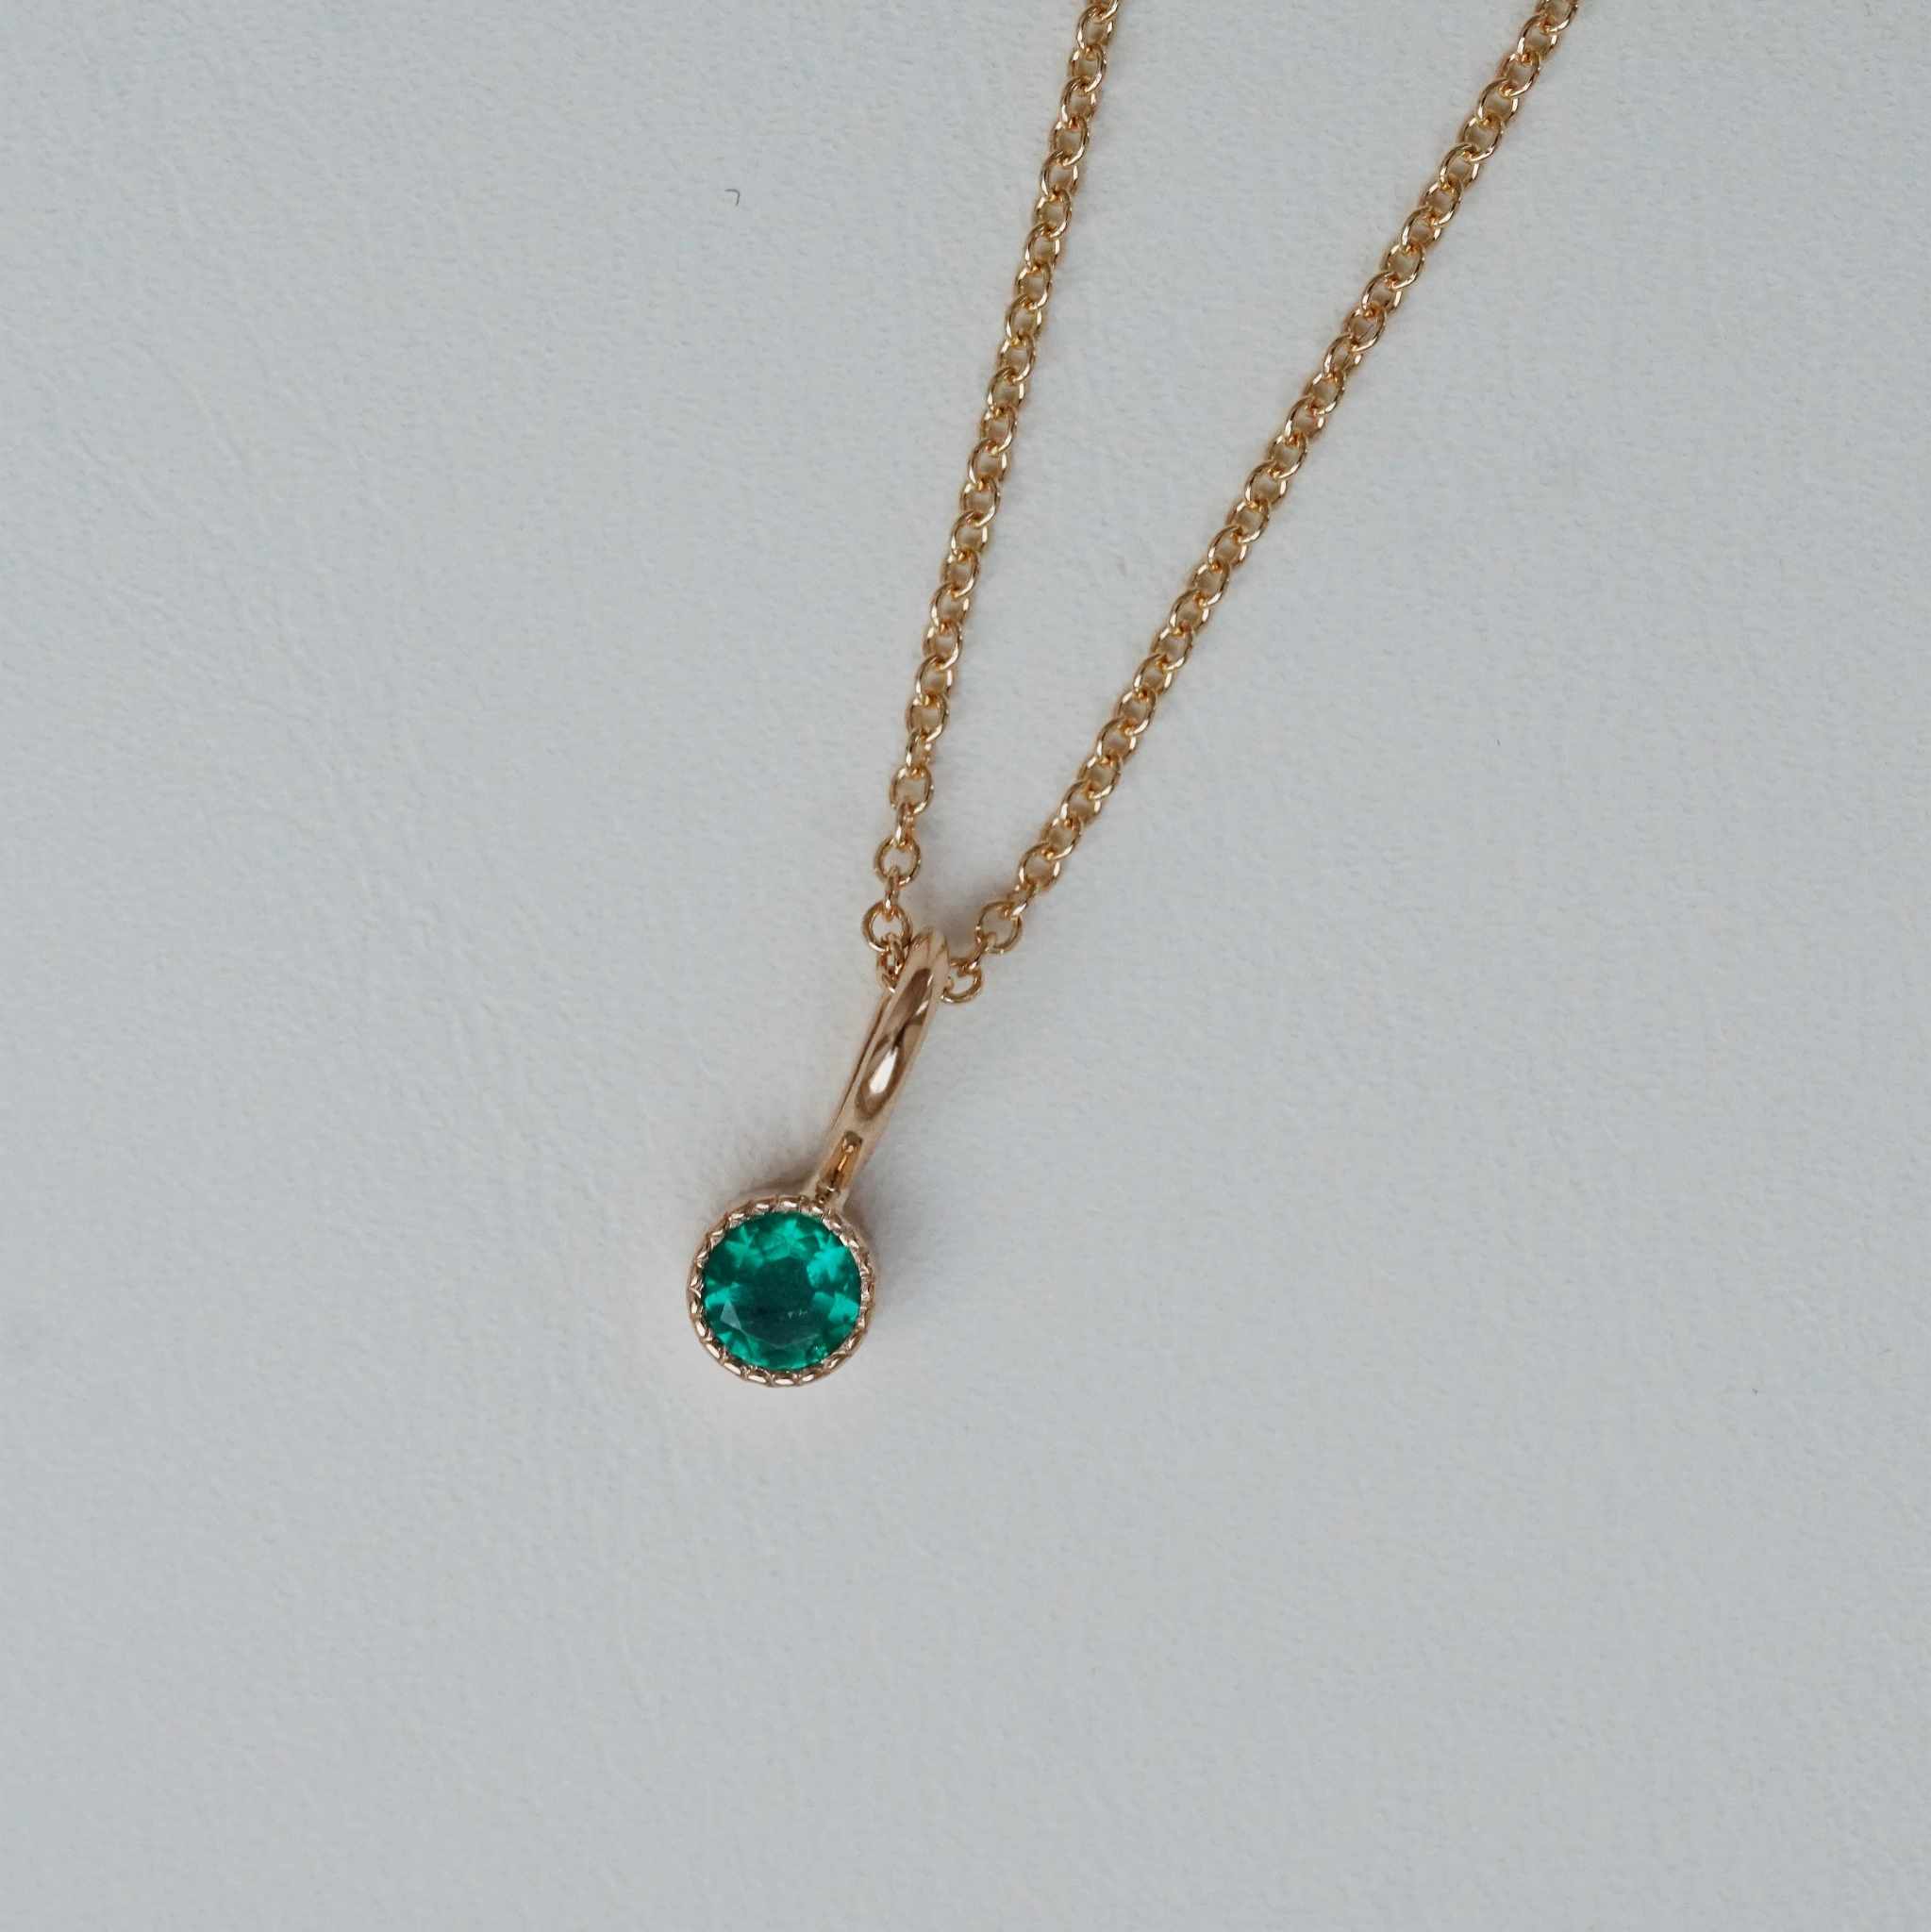 "Twinkle" pendant in gold with an emerald